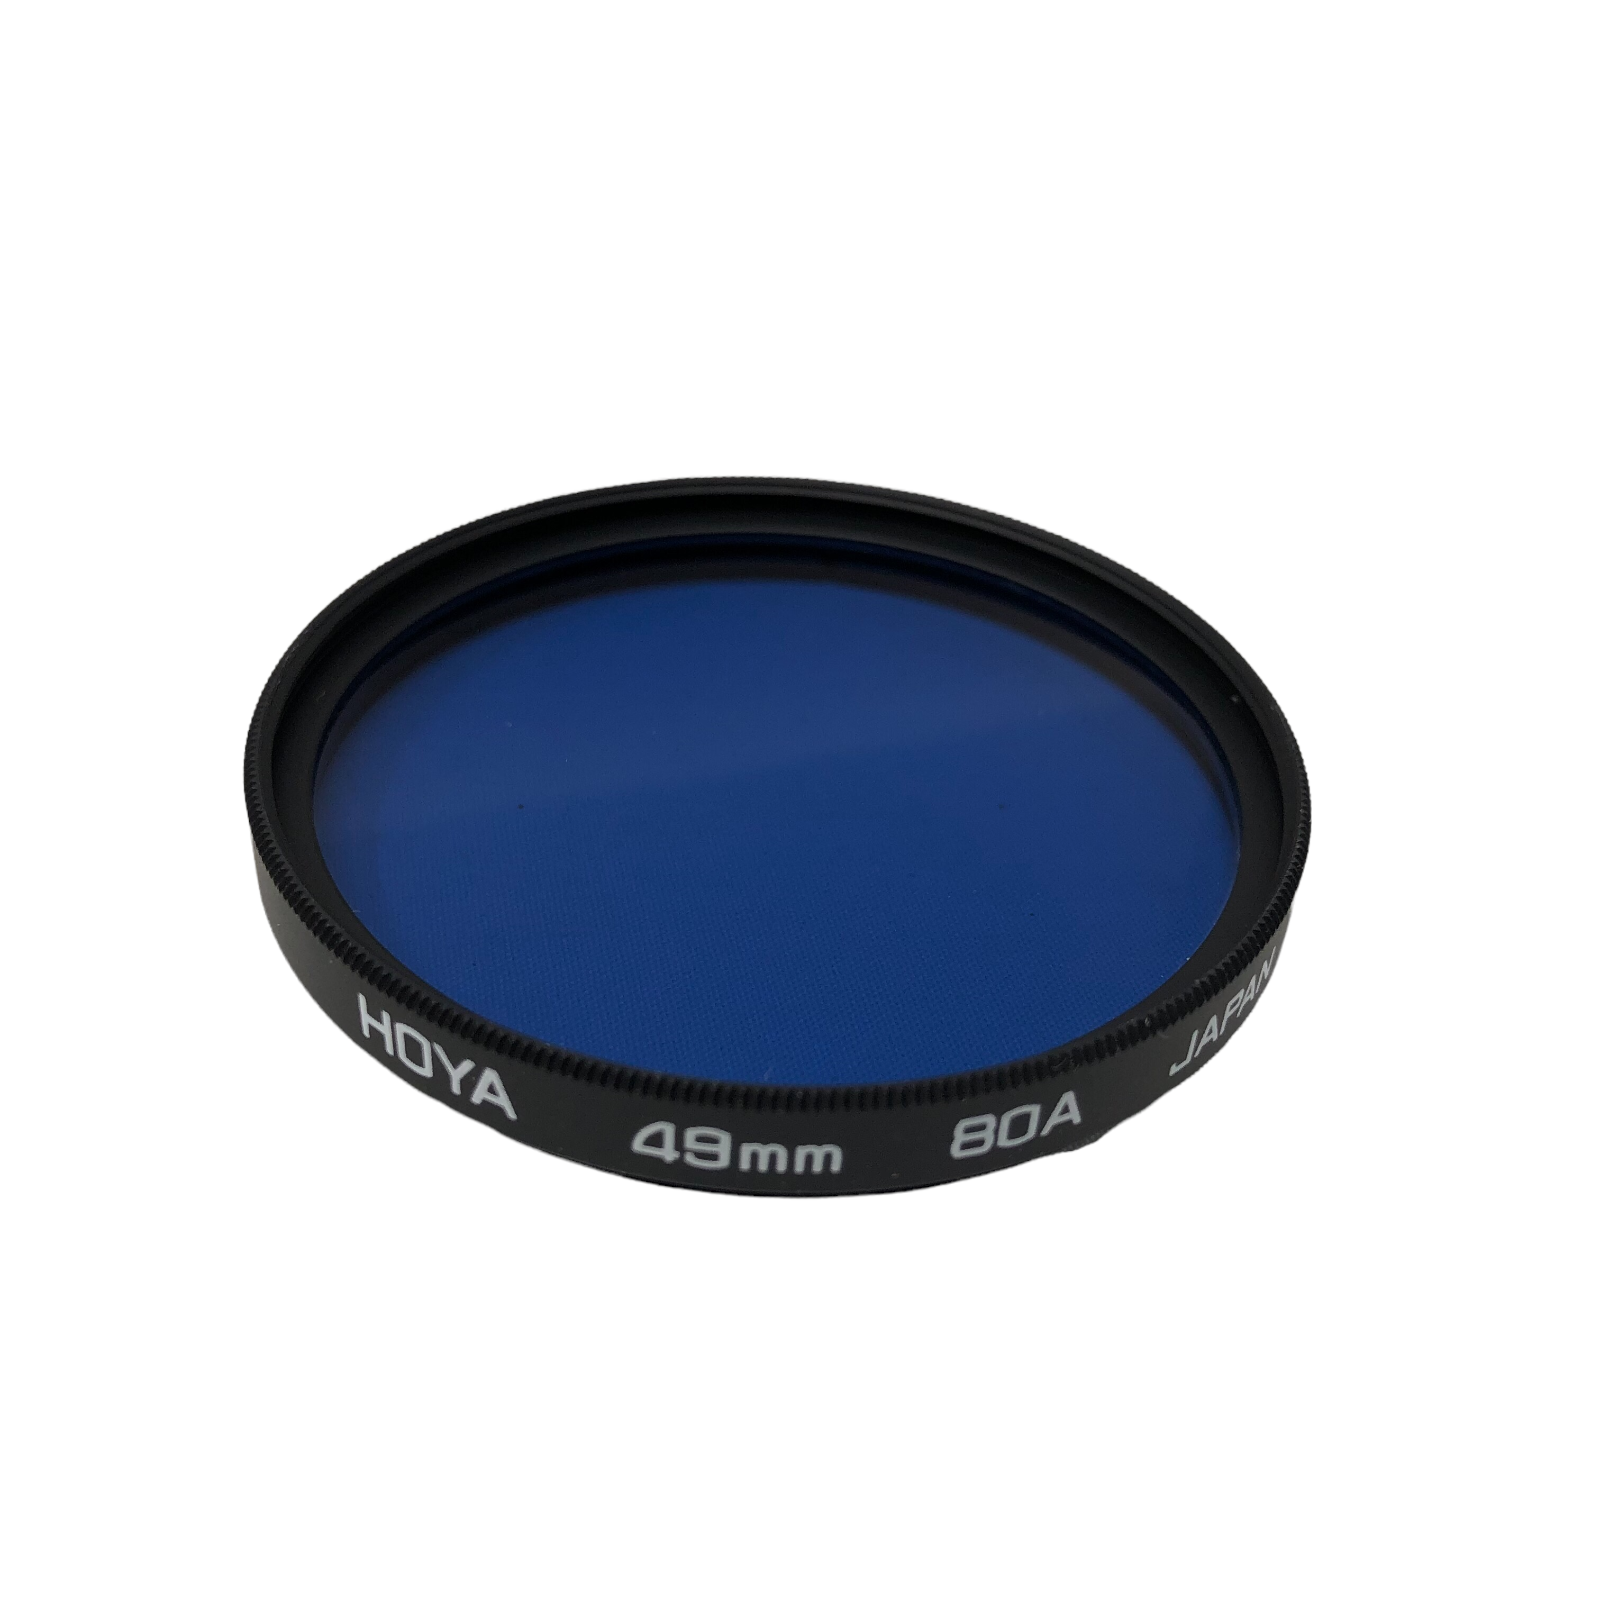 Primary image for Hoya 49mm 80a Blue Glass Filter Made in Japan